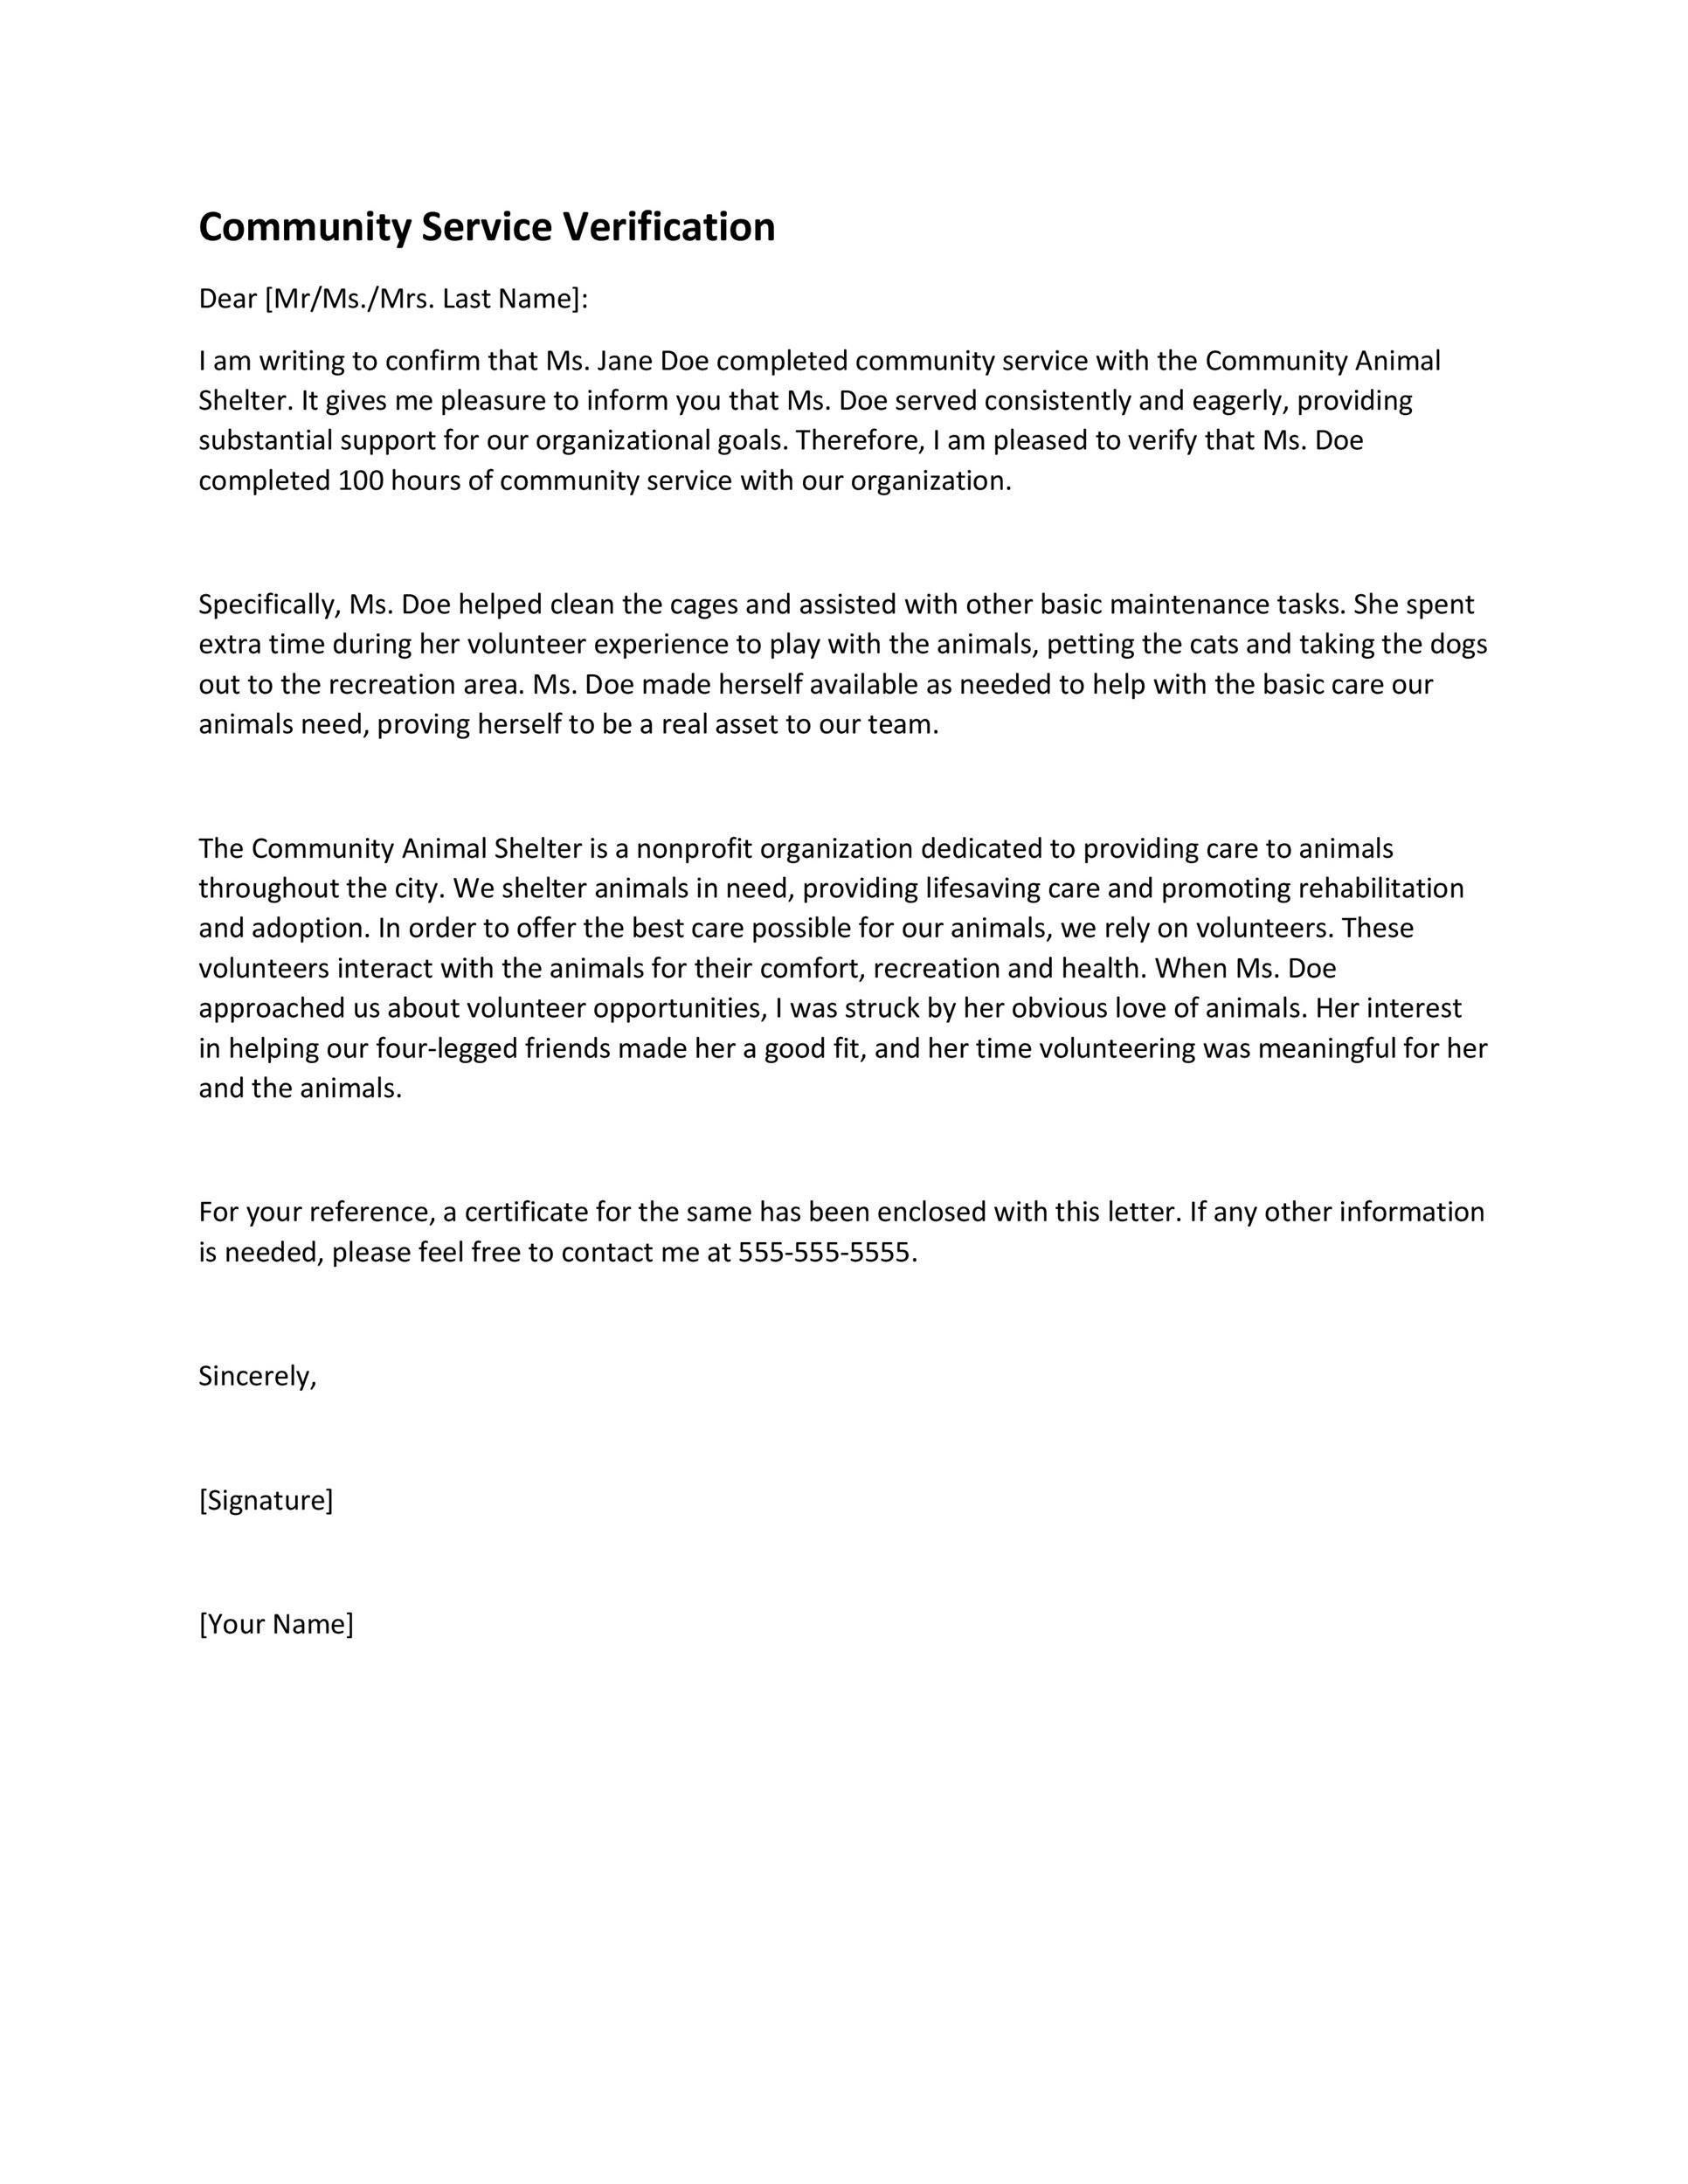 Free community service letter template 10